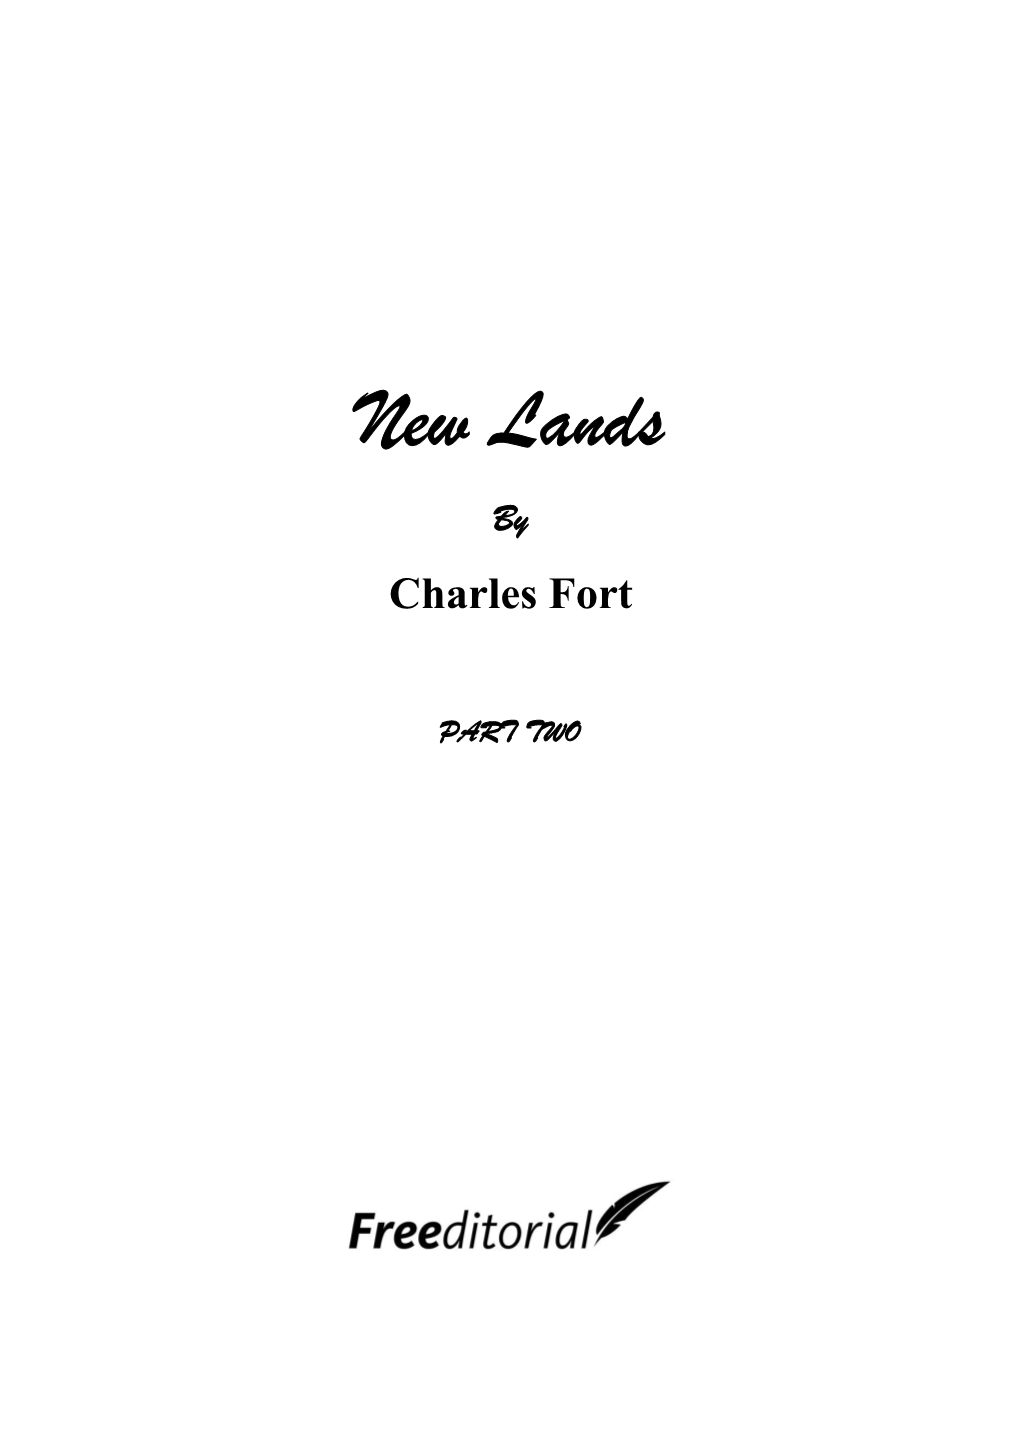 New Lands by Charles Fort